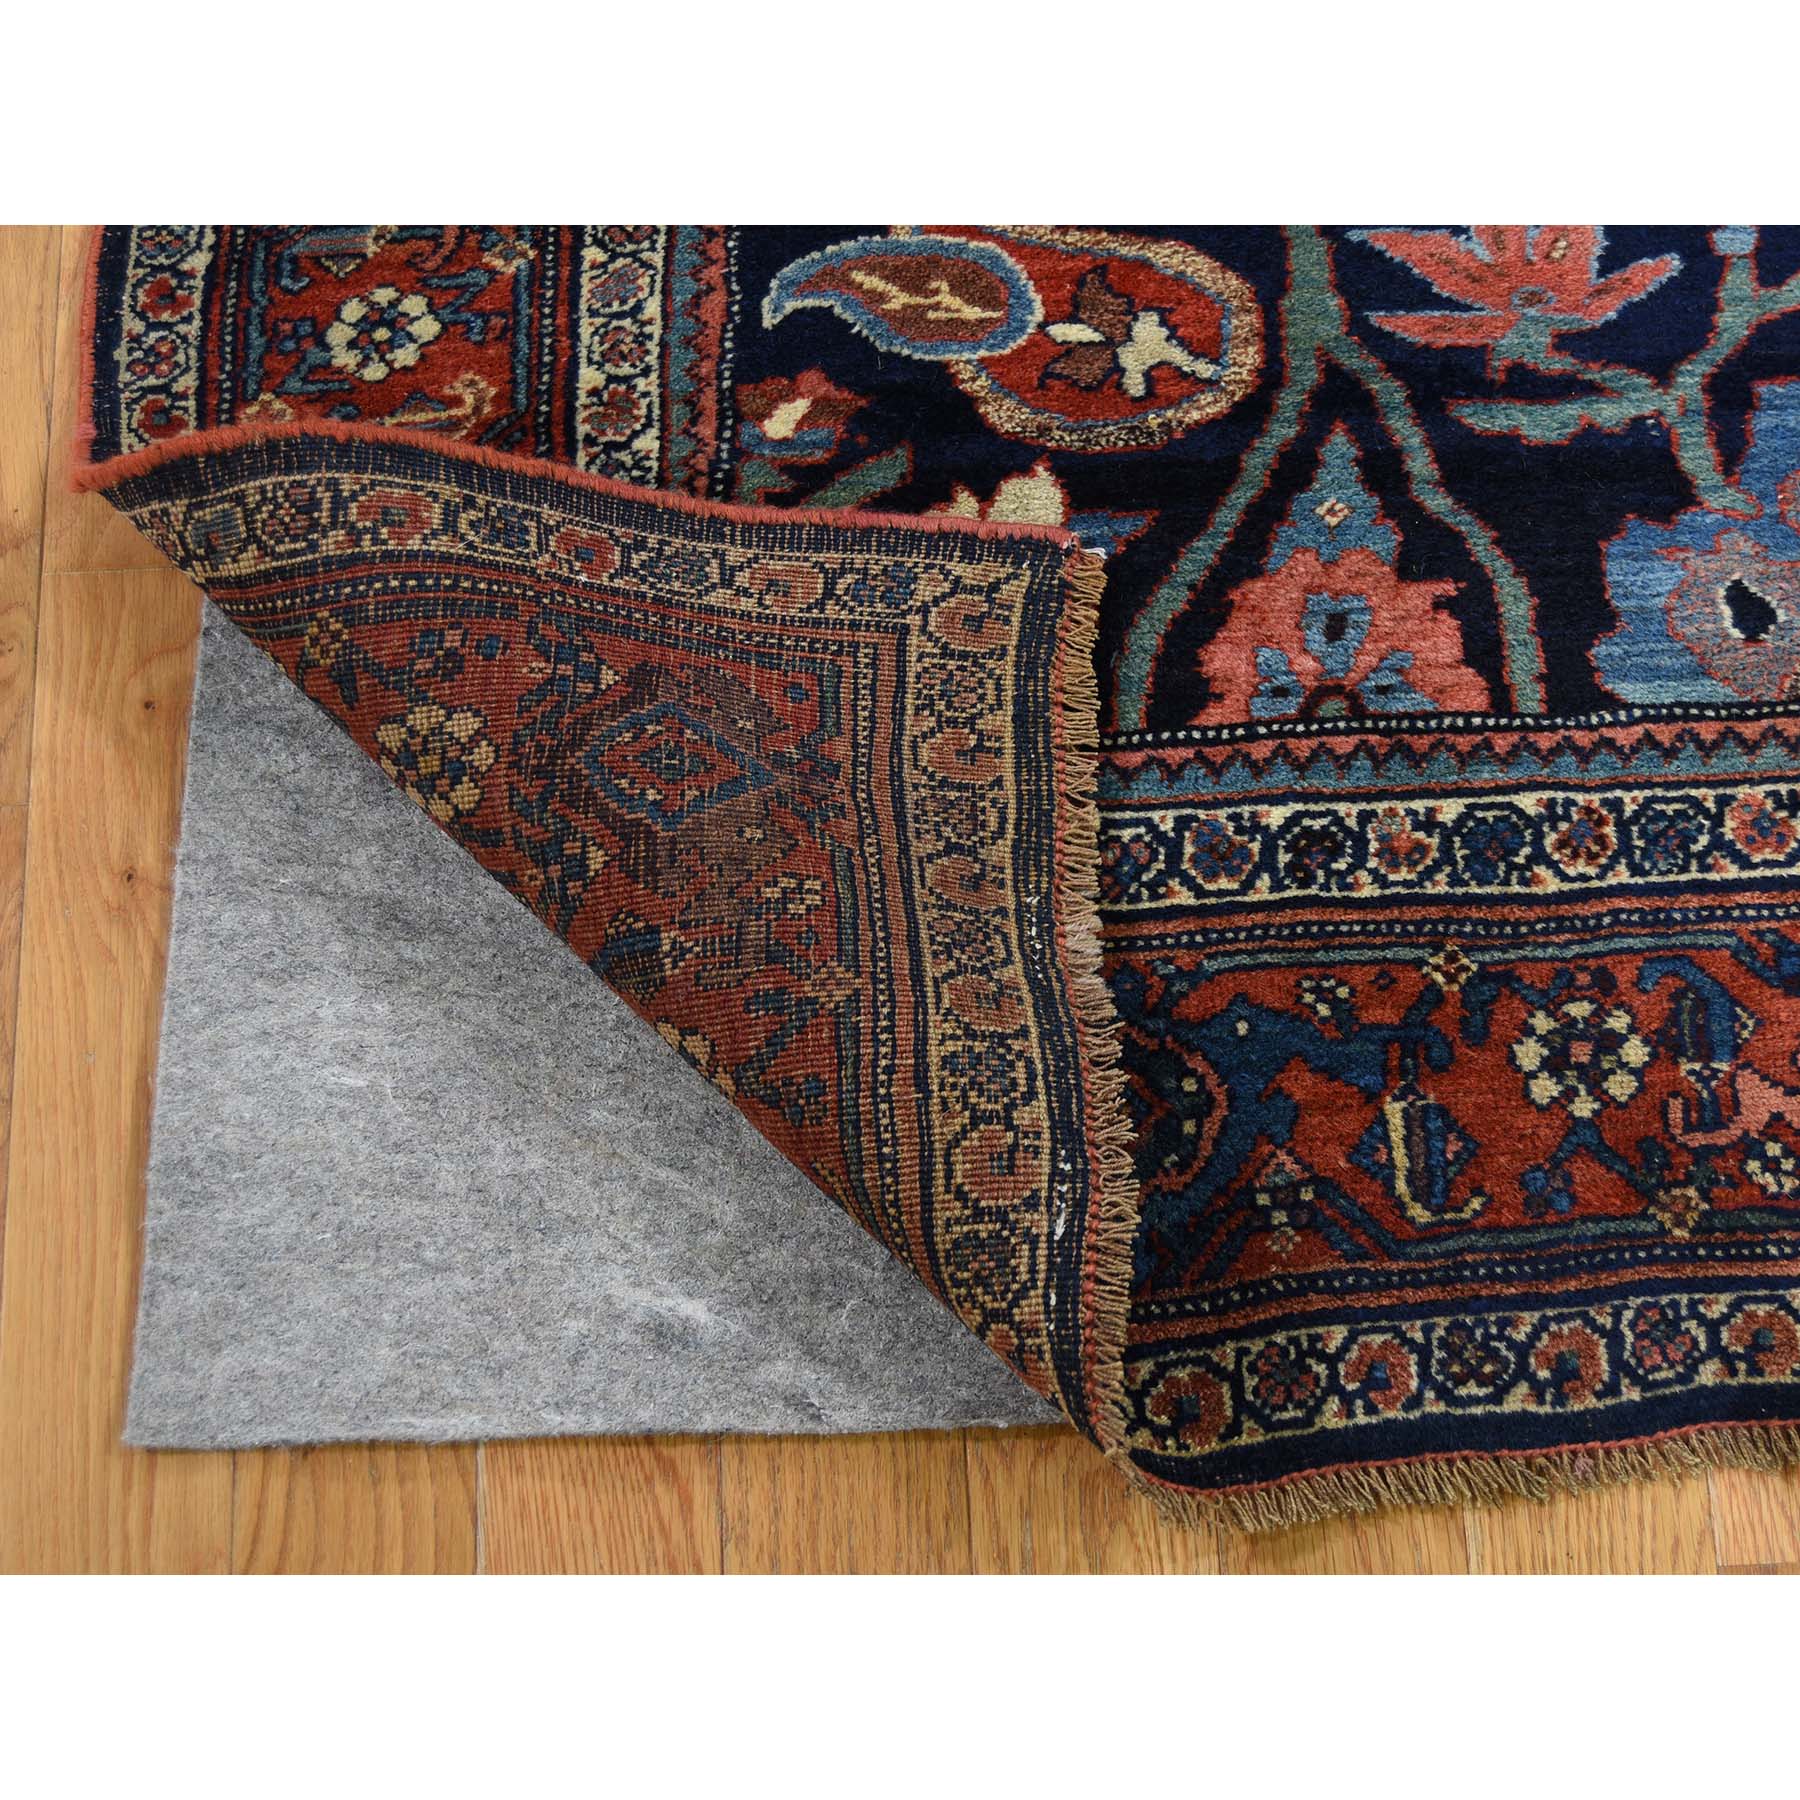 4-6 x6-6  Antique Persian Bijar Pure Wool Exc Condition Full Pile Hand-Knotted Oriental Rug 